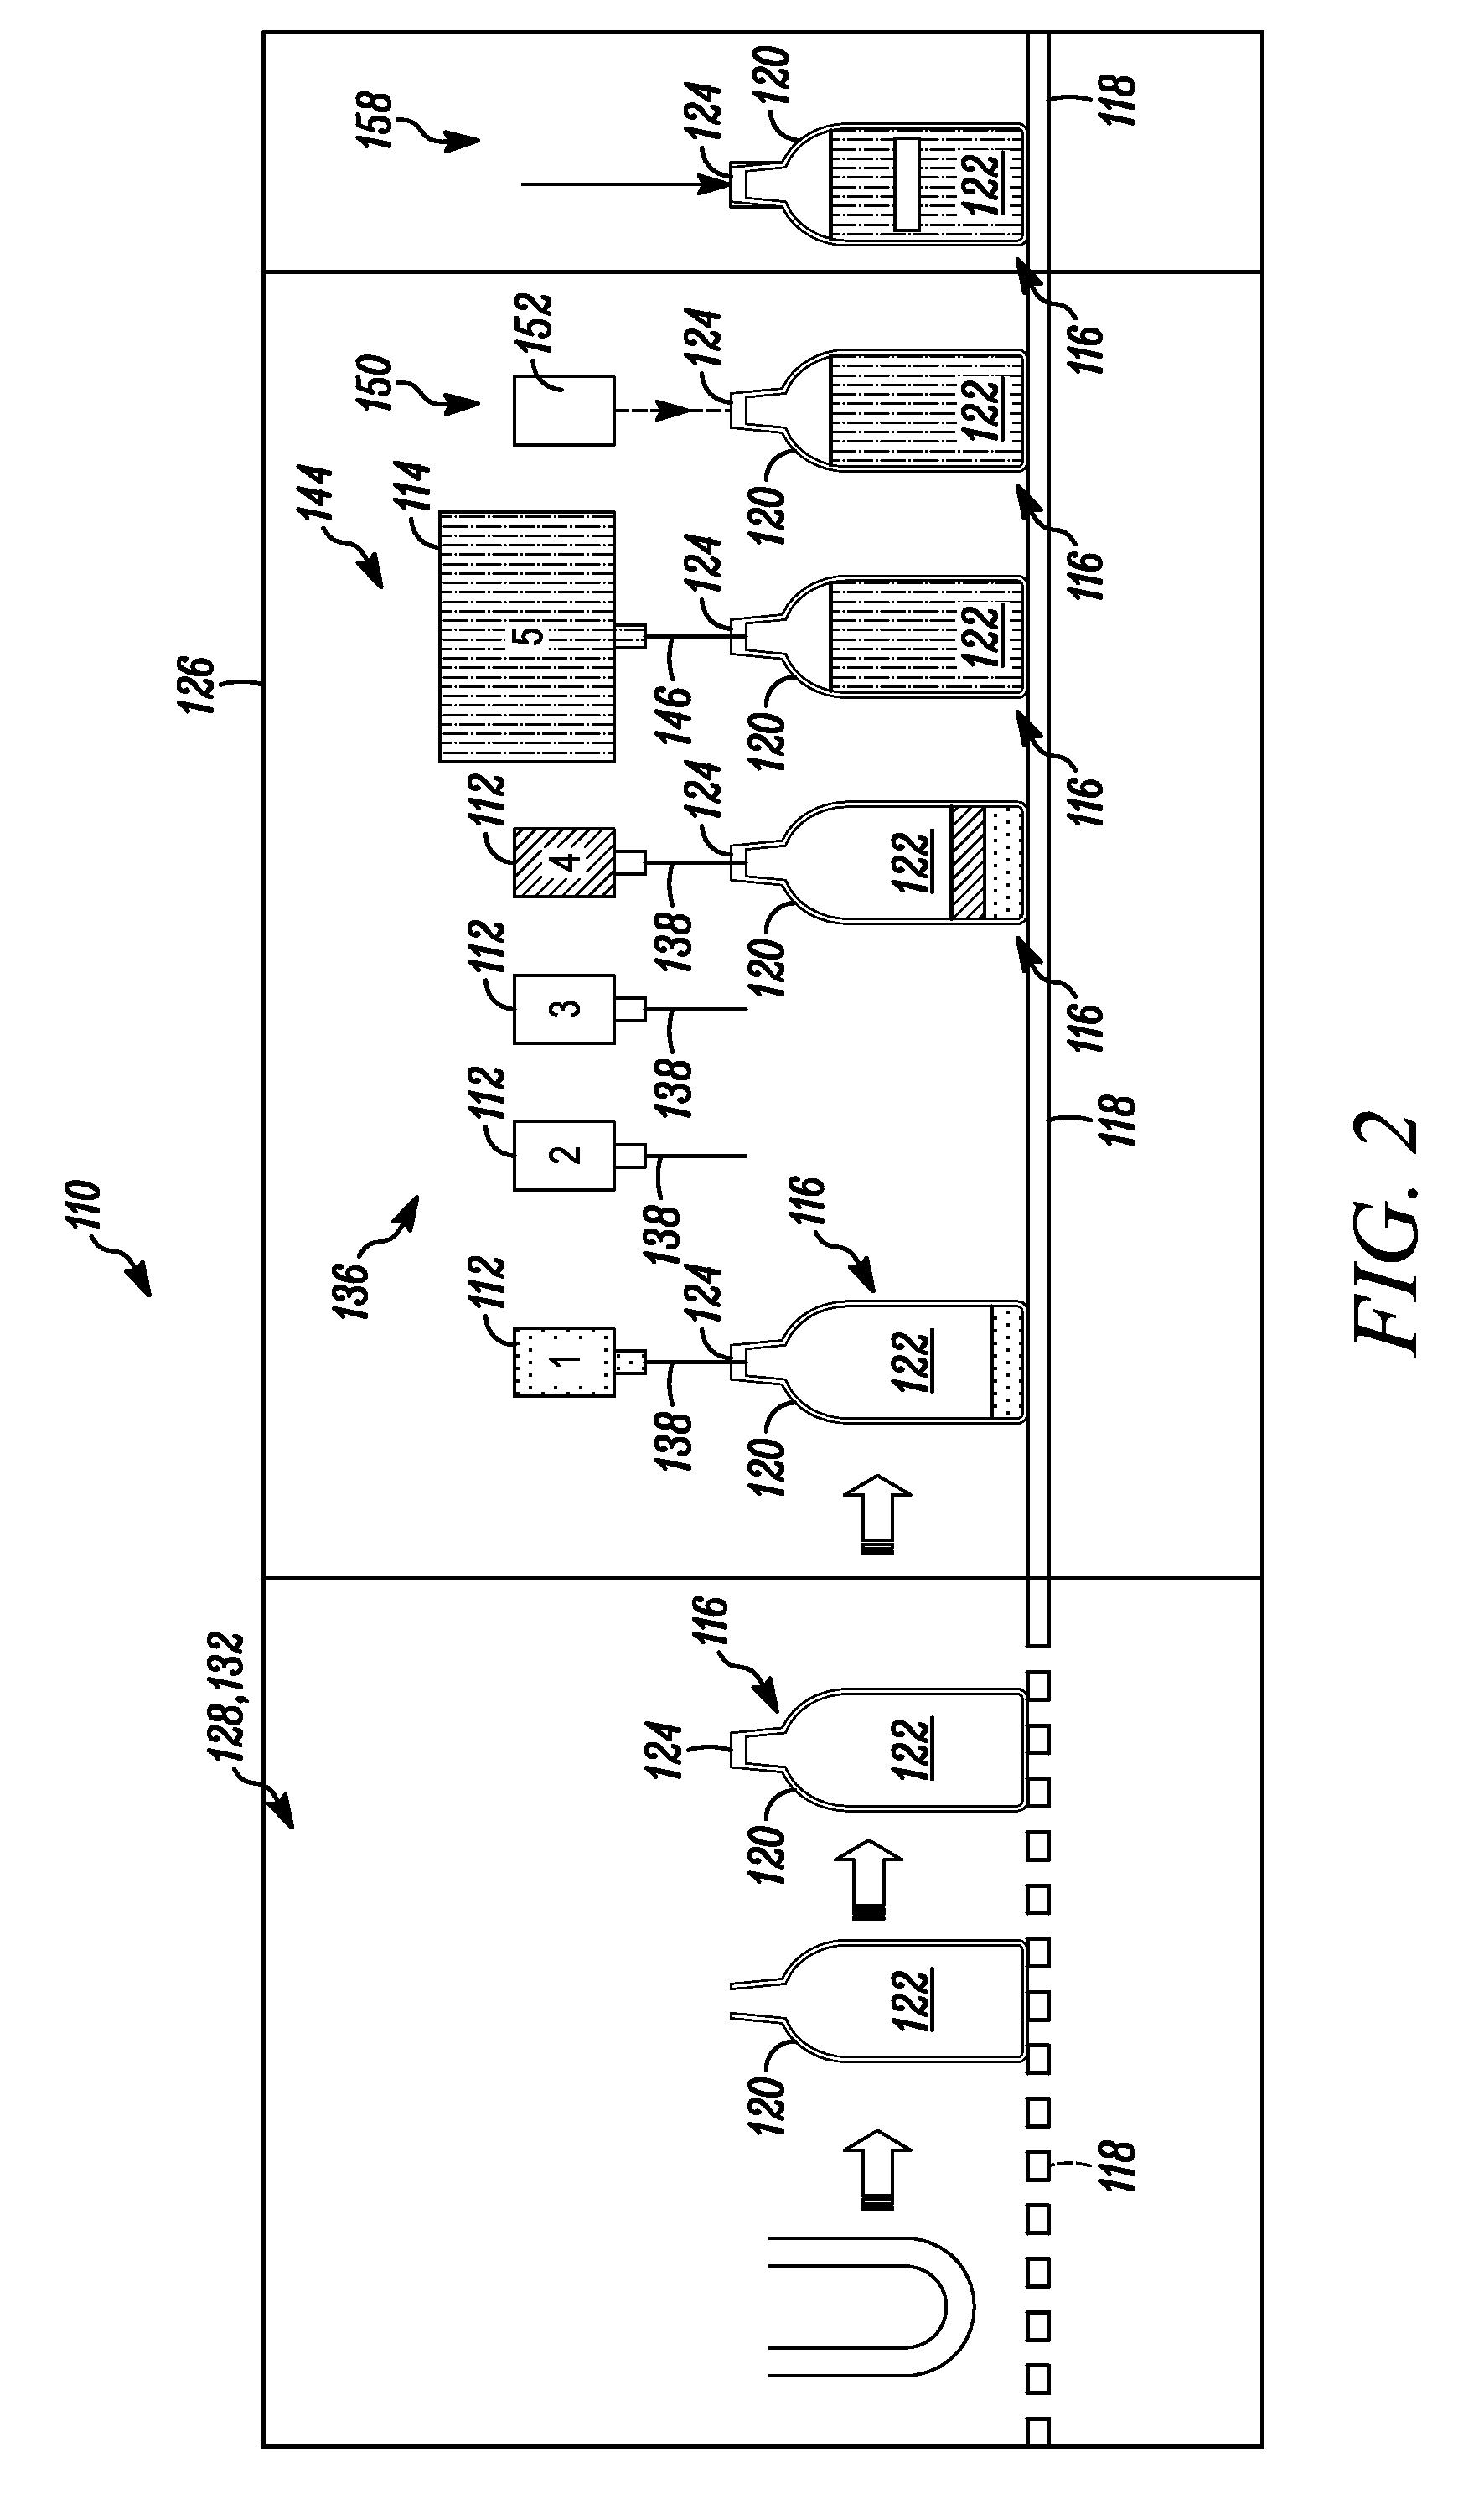 Apparatus for formulating and aseptically filling liquid products